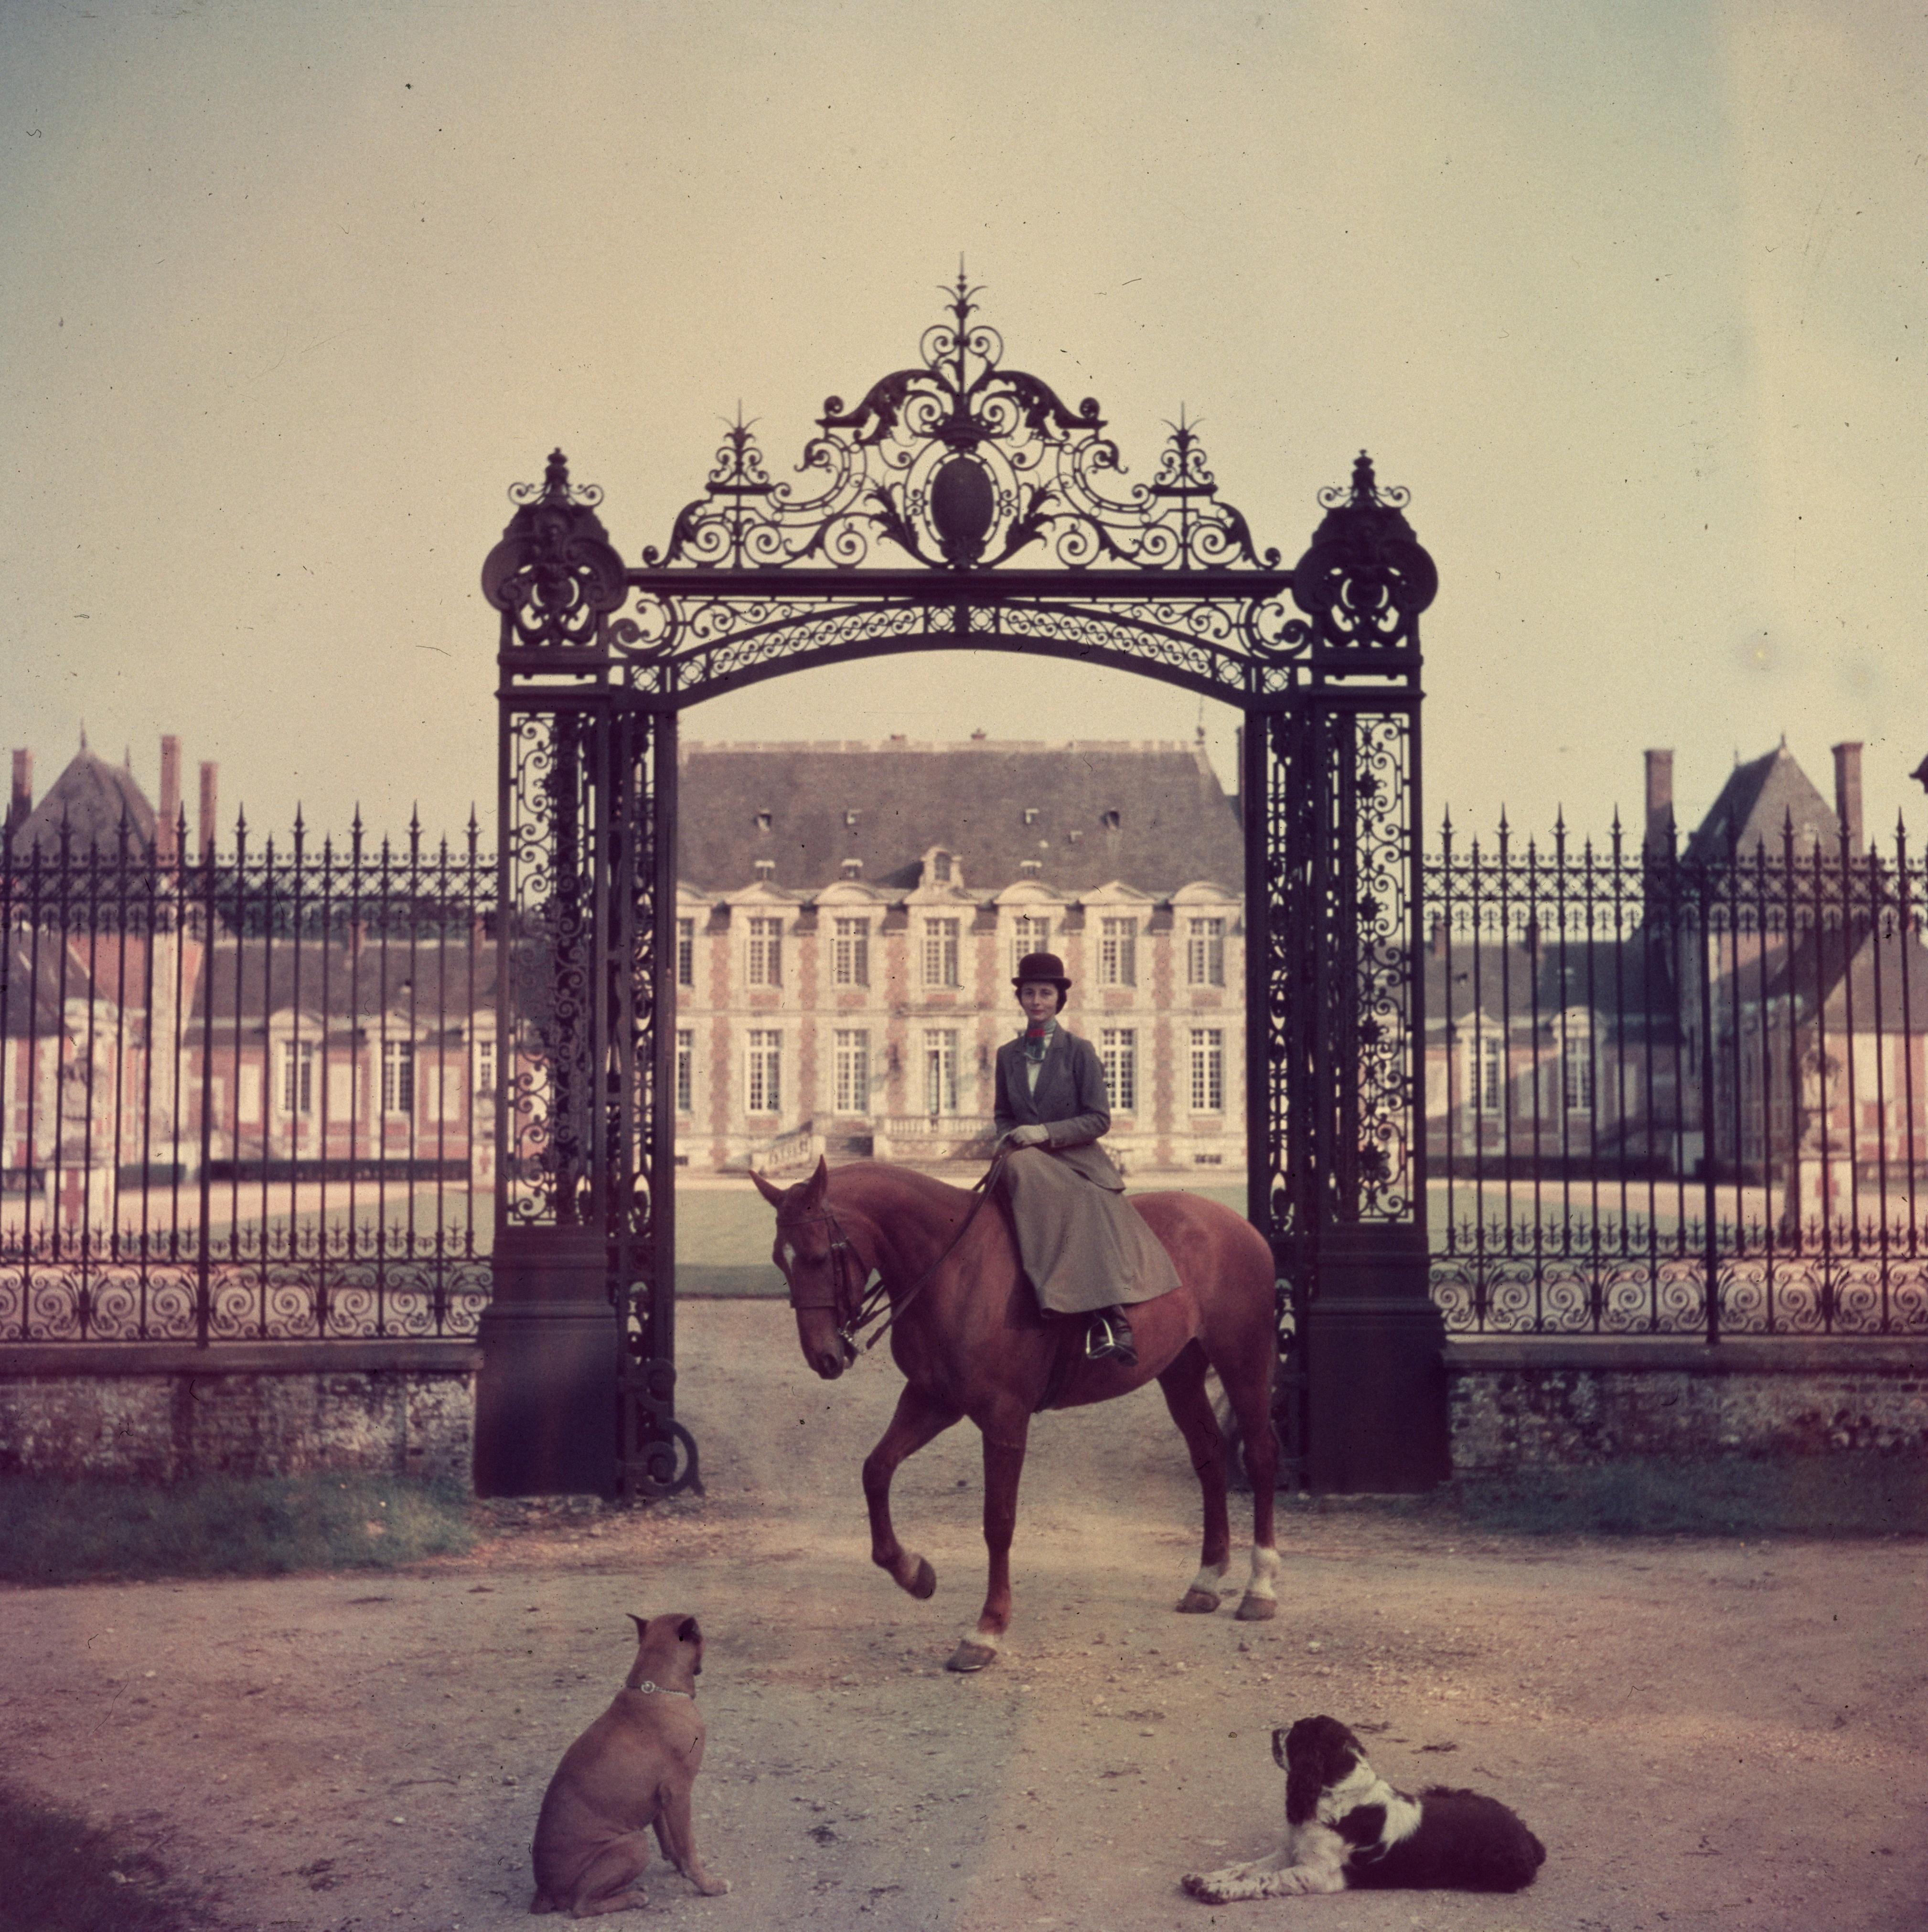 'Equestrian Entrance' Slim Aarons Limited Edition Estate Stamped Print
1957 Madame de la Haye-Jousselin on her horse at the gates to her chateau in Normandy. 

Slim Aarons Chromogenic C print 
Printed Later 
Slim Aarons Estate Edition 
Produced